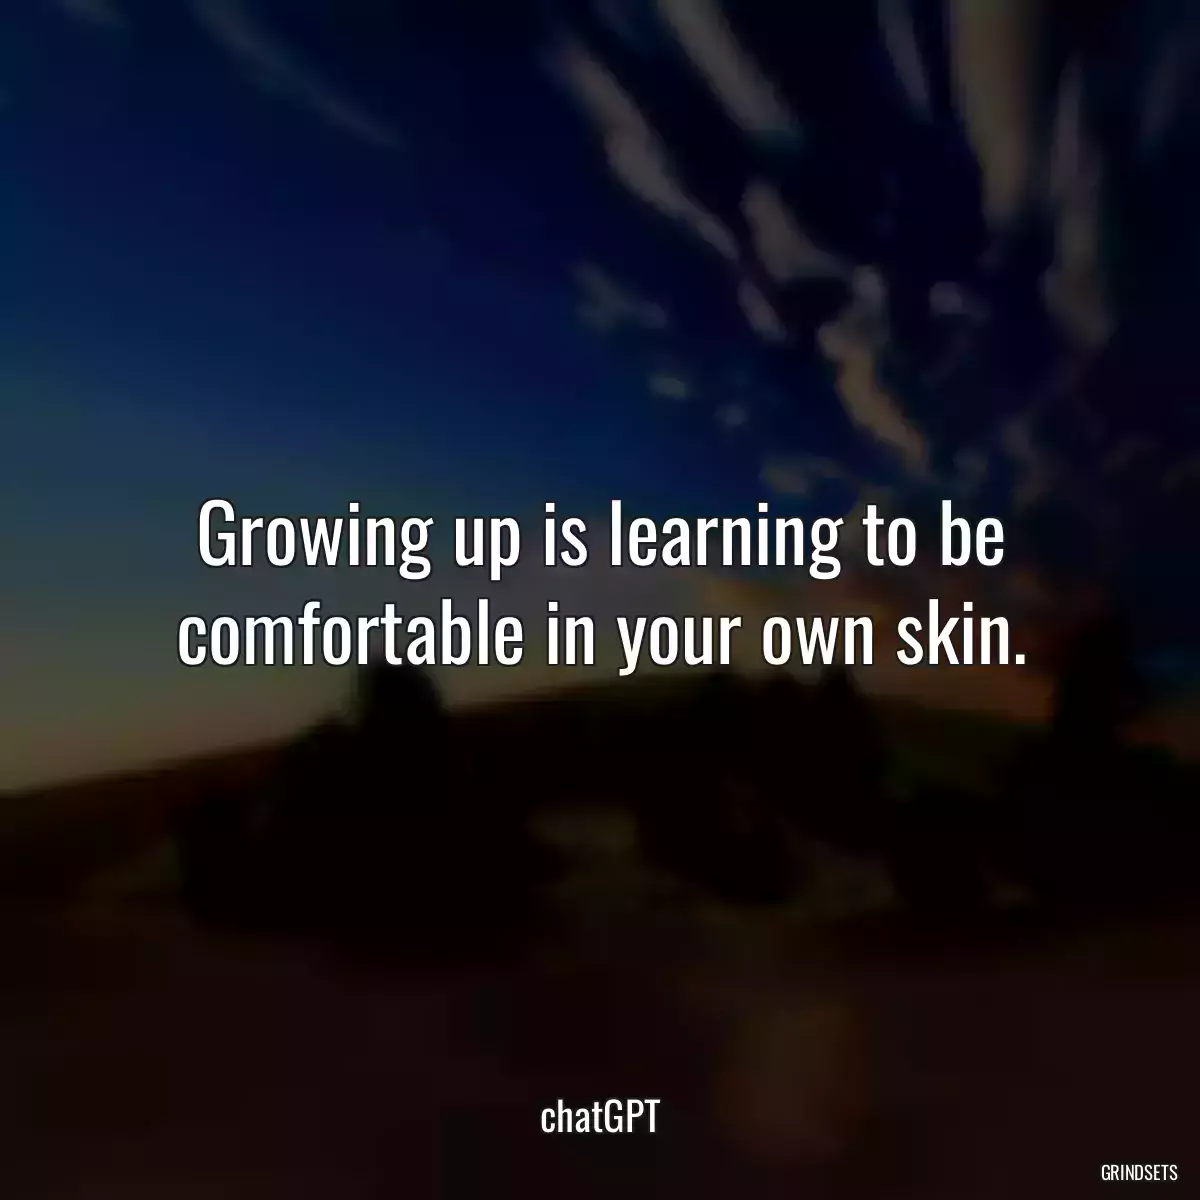 Growing up is learning to be comfortable in your own skin.